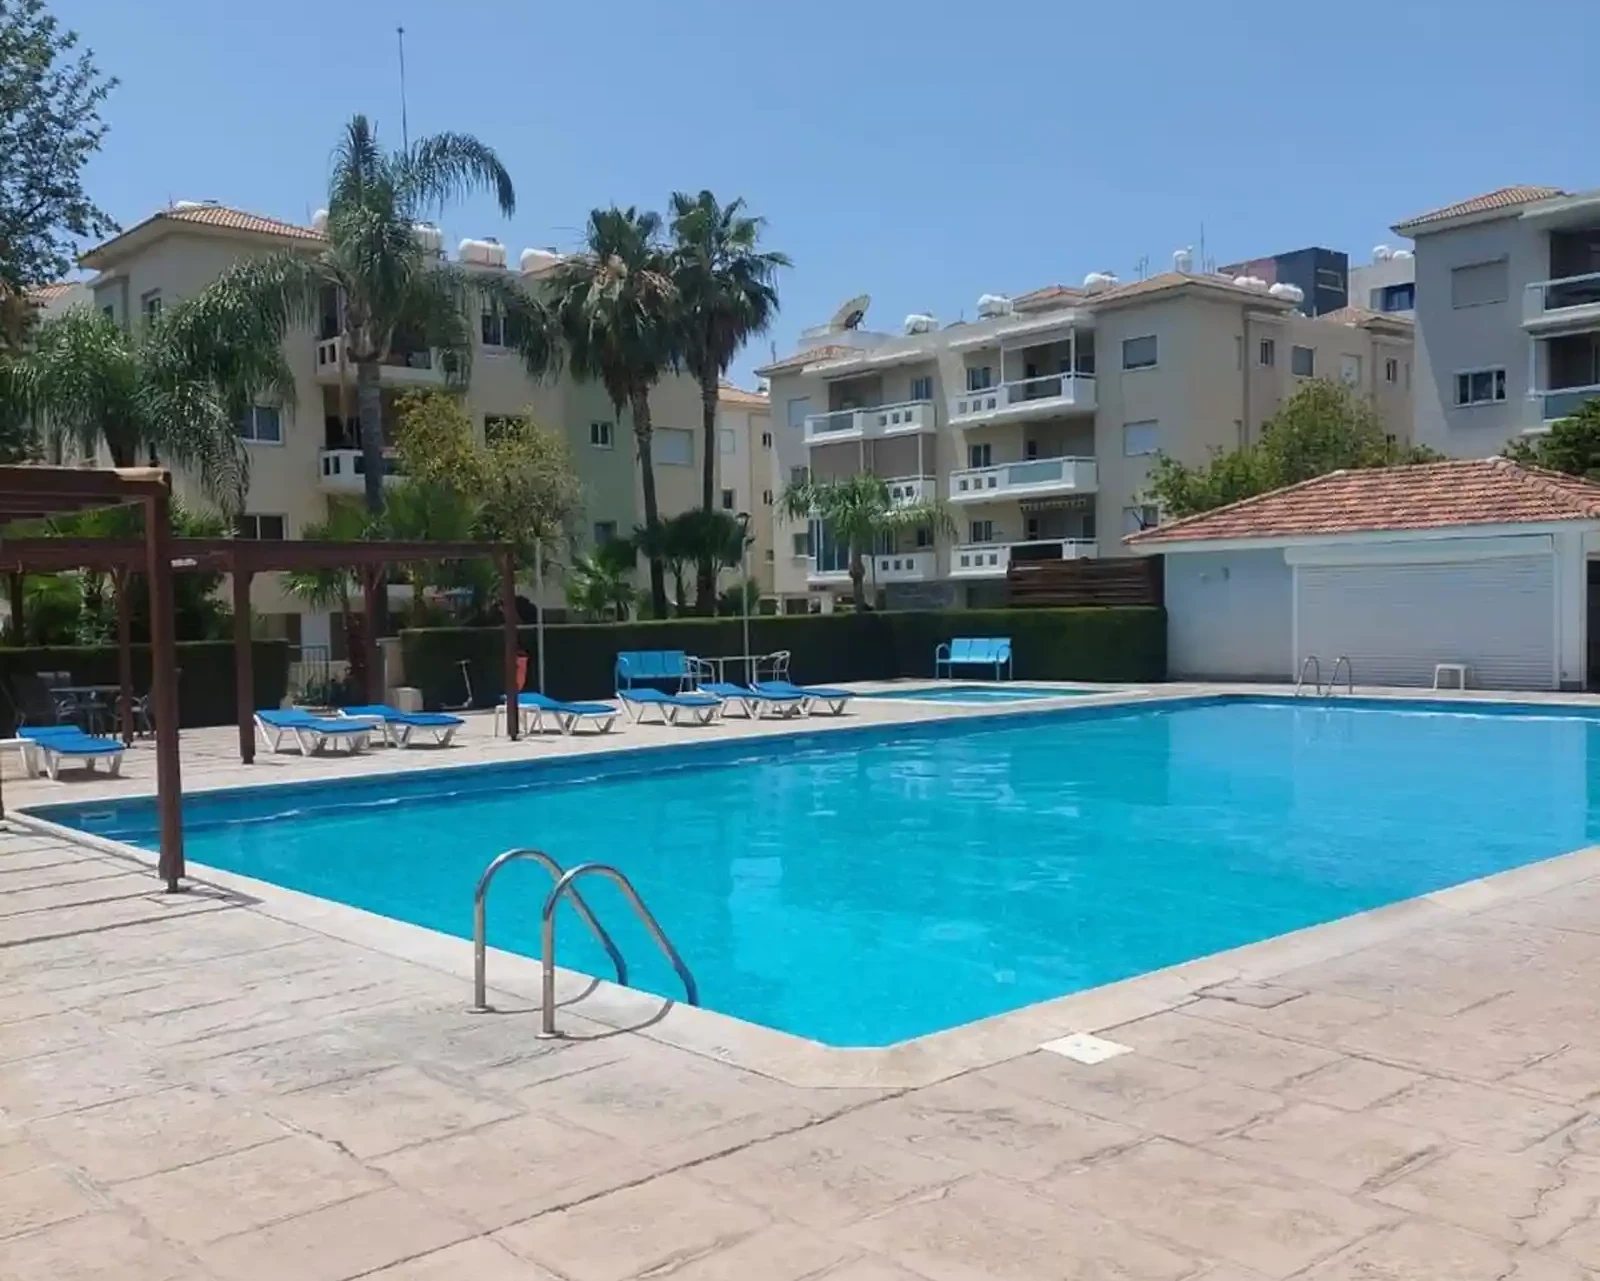 2-bedroom apartment fоr sаle €400.000, image 1